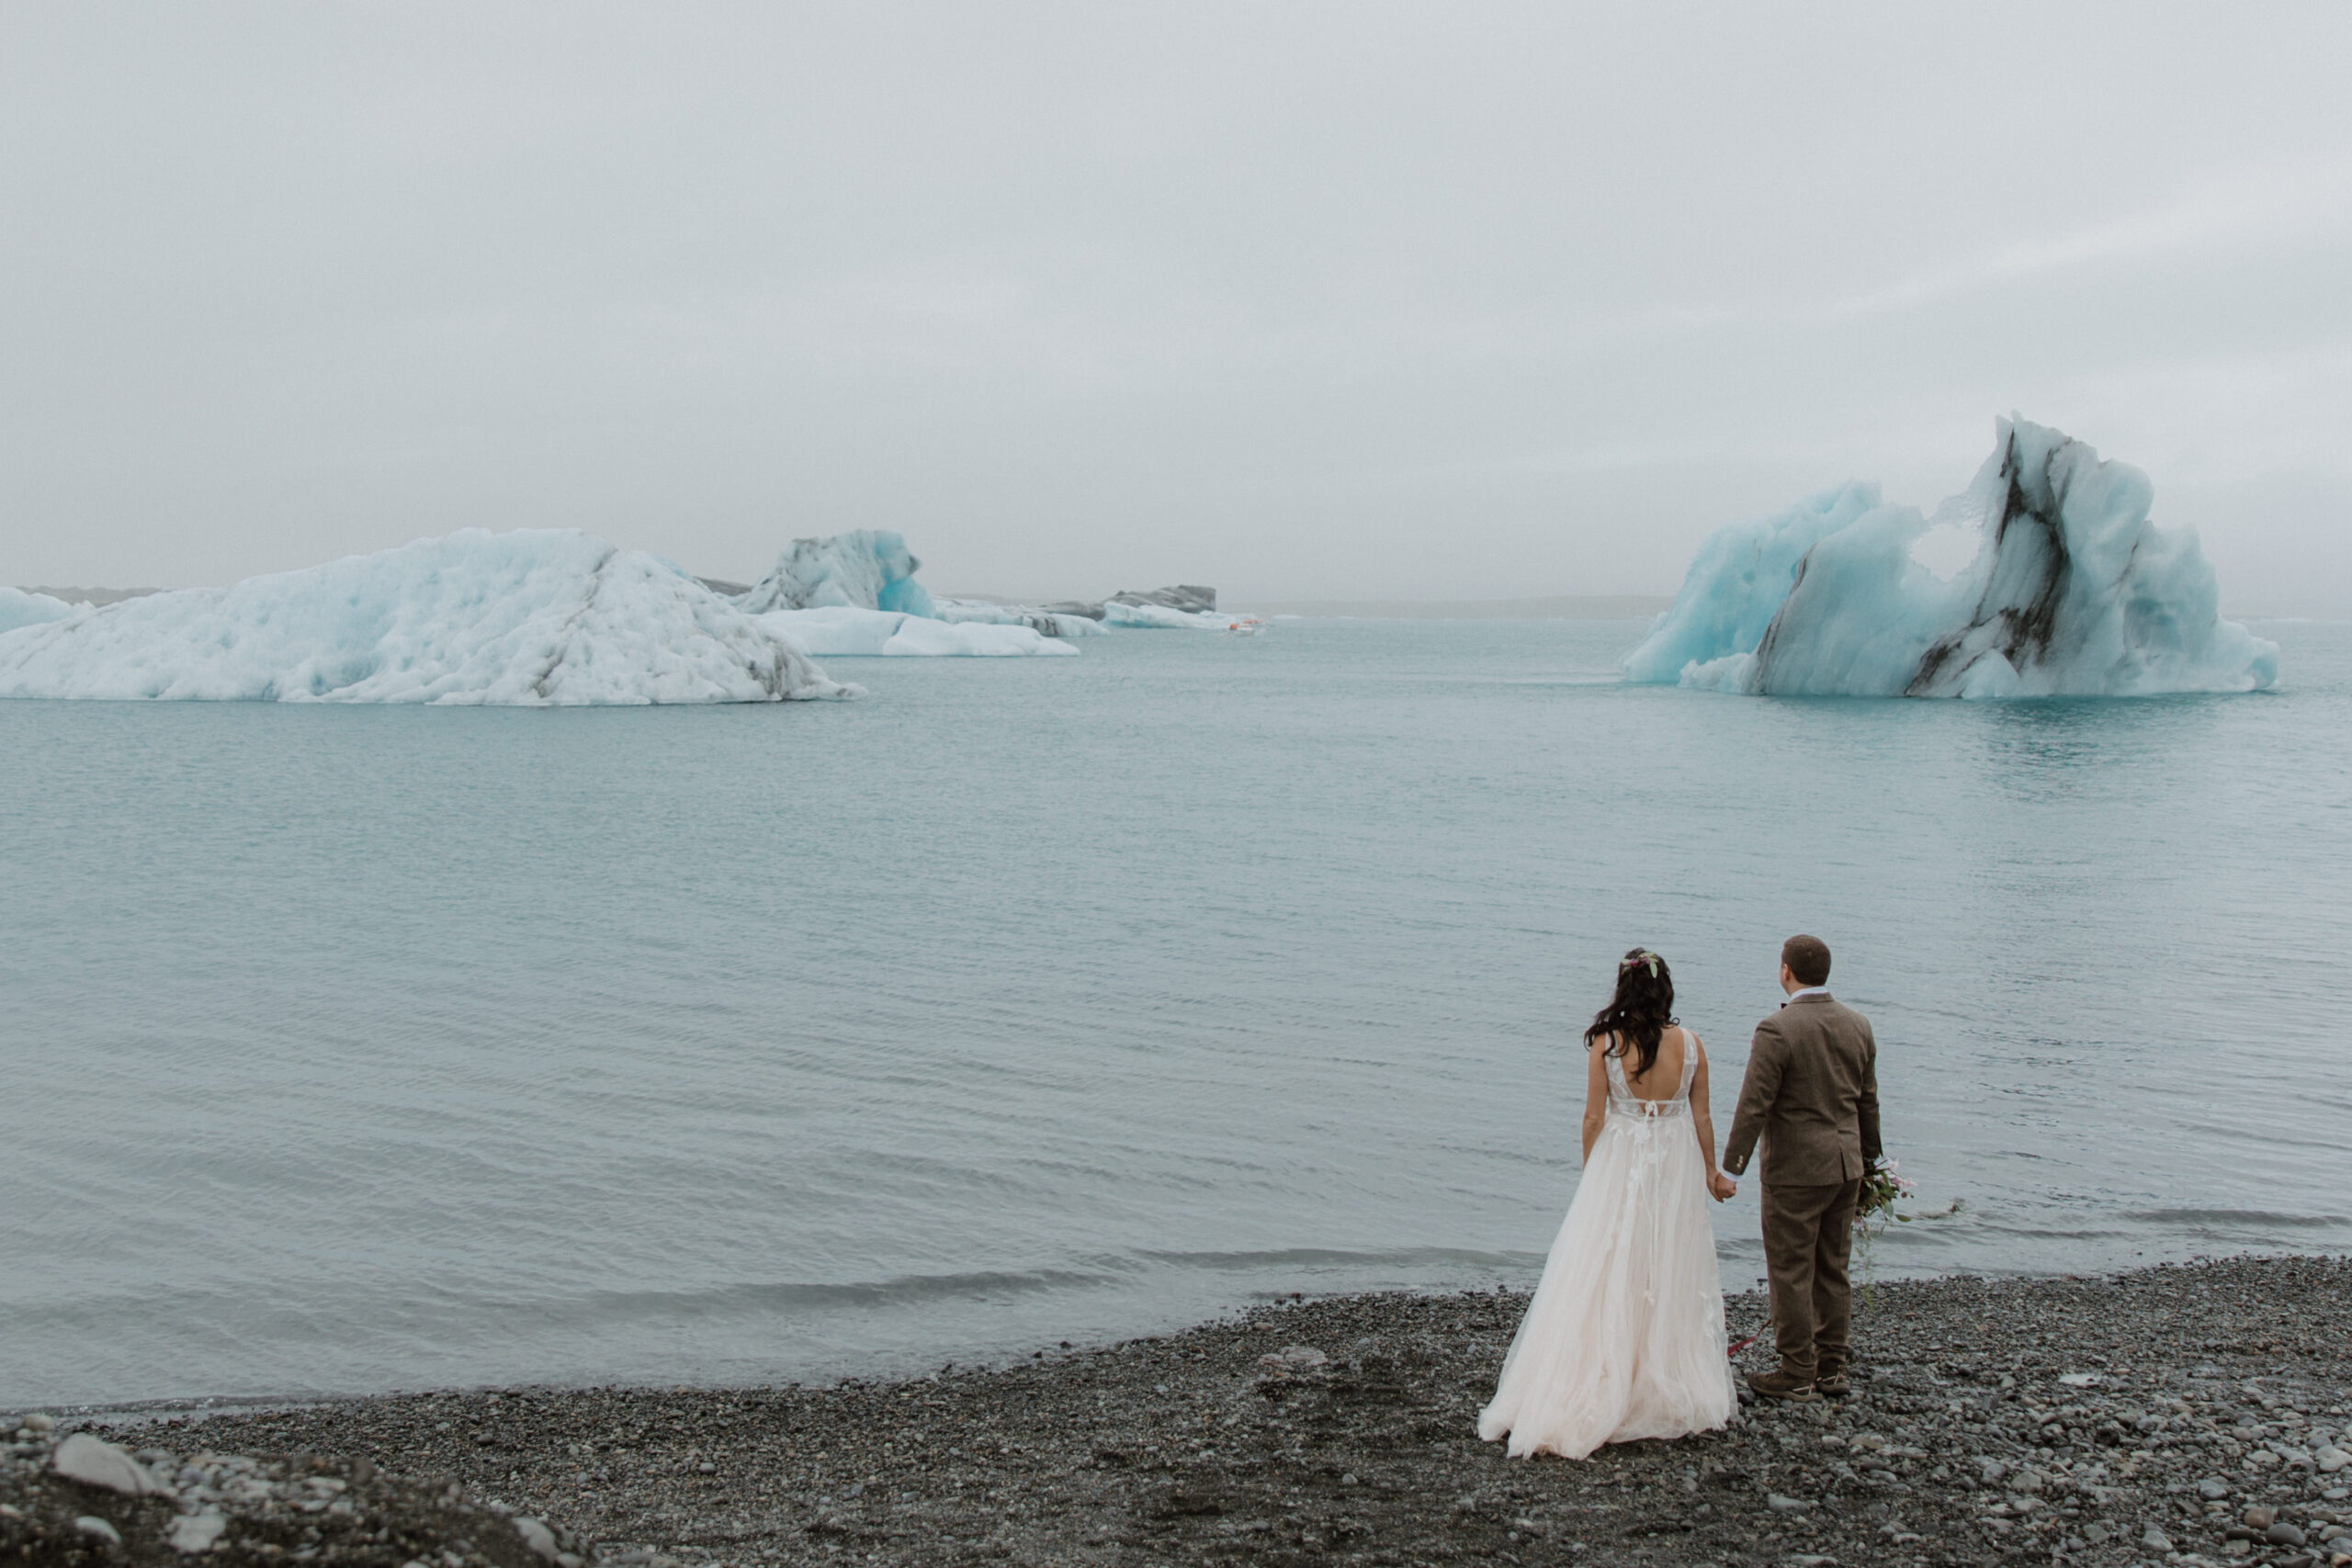 How To Elope In Iceland: The Ultimate Elopement Guide